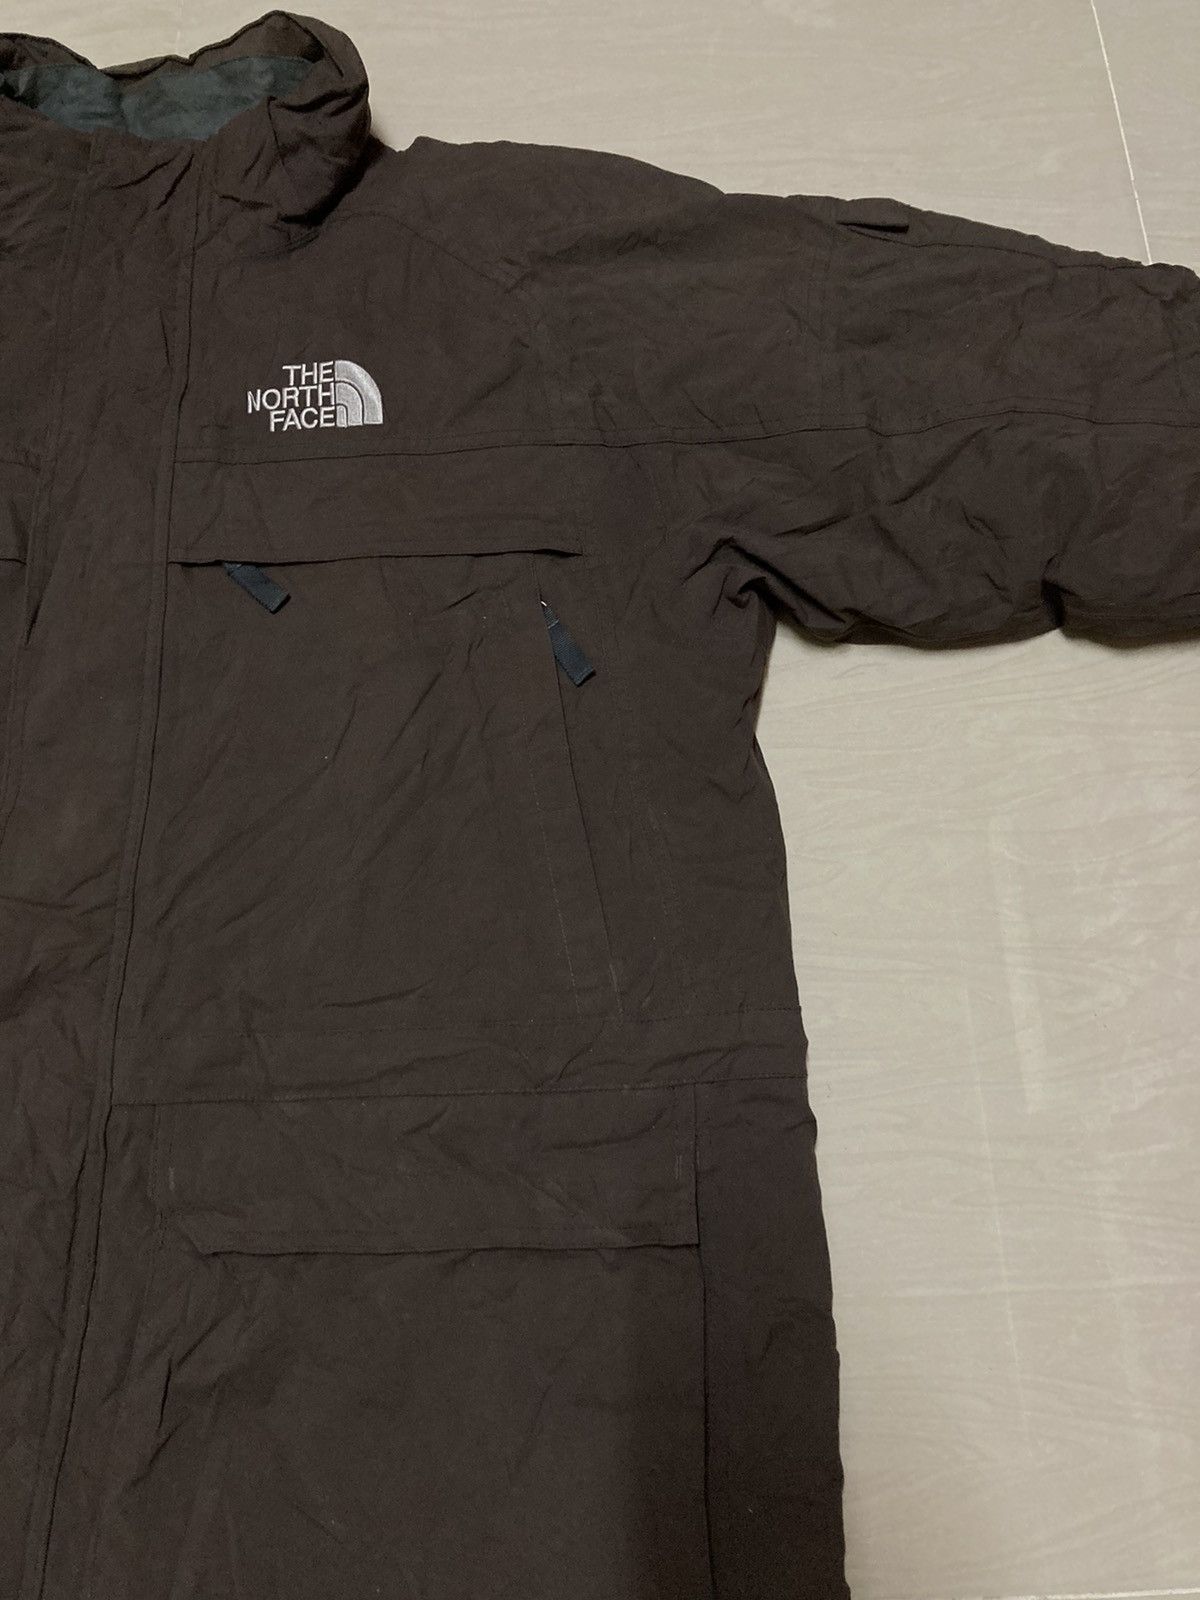 The North Face Hyvent TNF NSE F07 Parka Down Jacket - 3